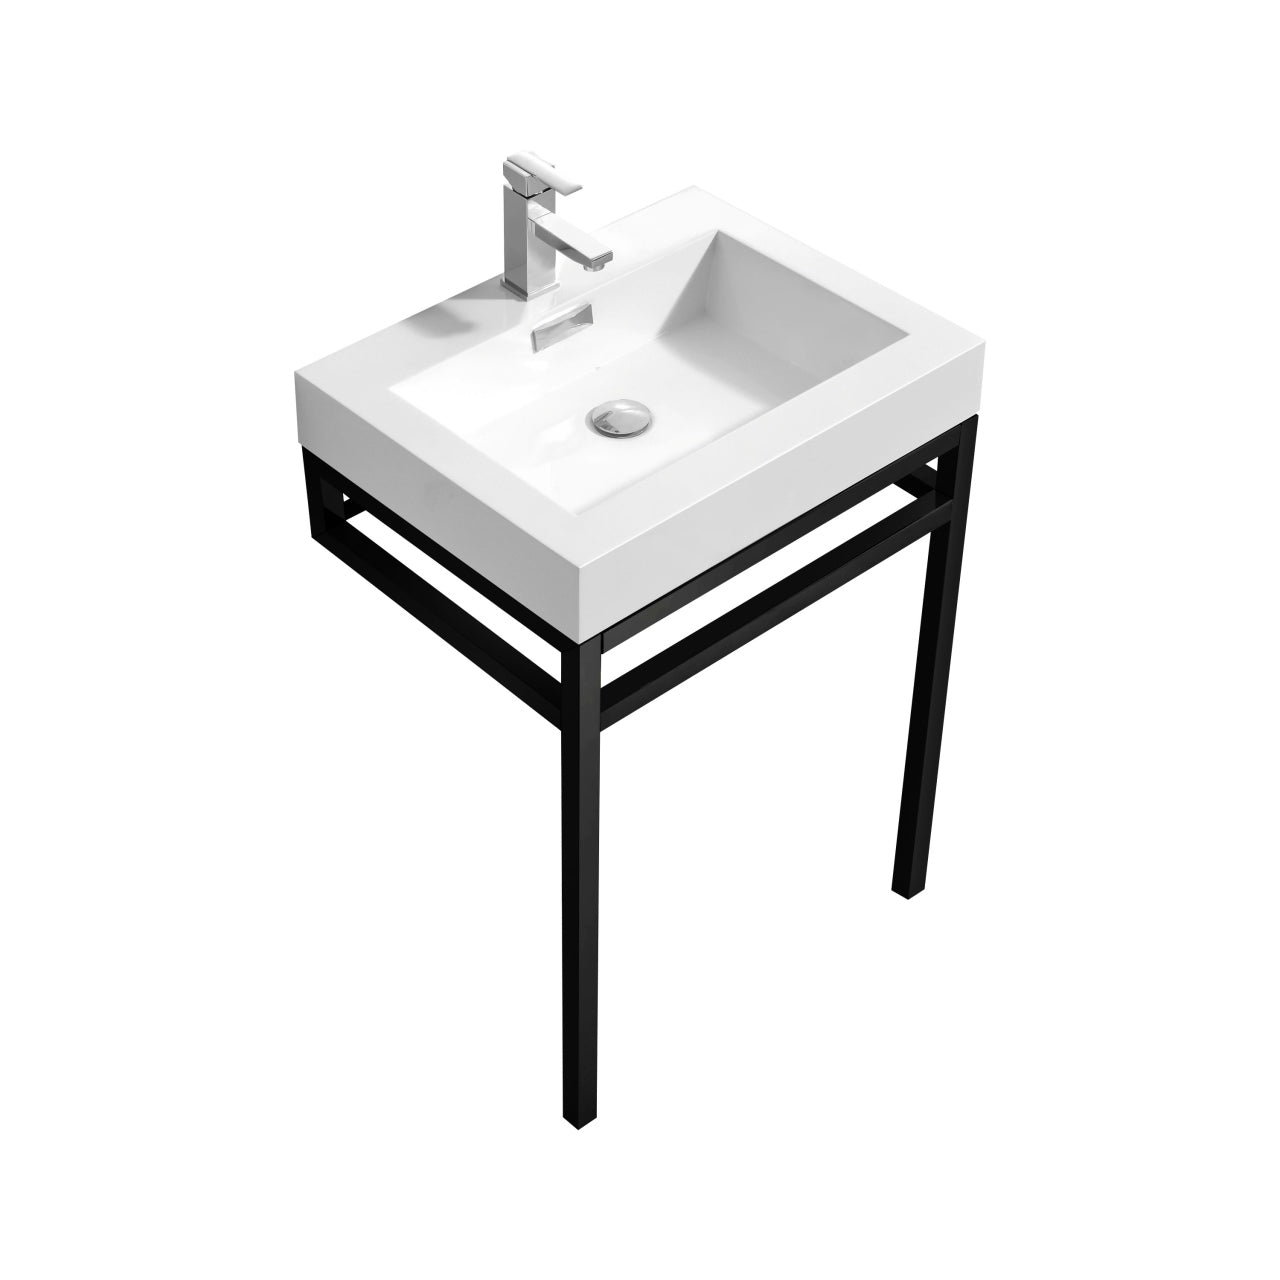 Haus 24″ Inch Stainless Steel Console W/ White Acrylic Sink – Matte Black